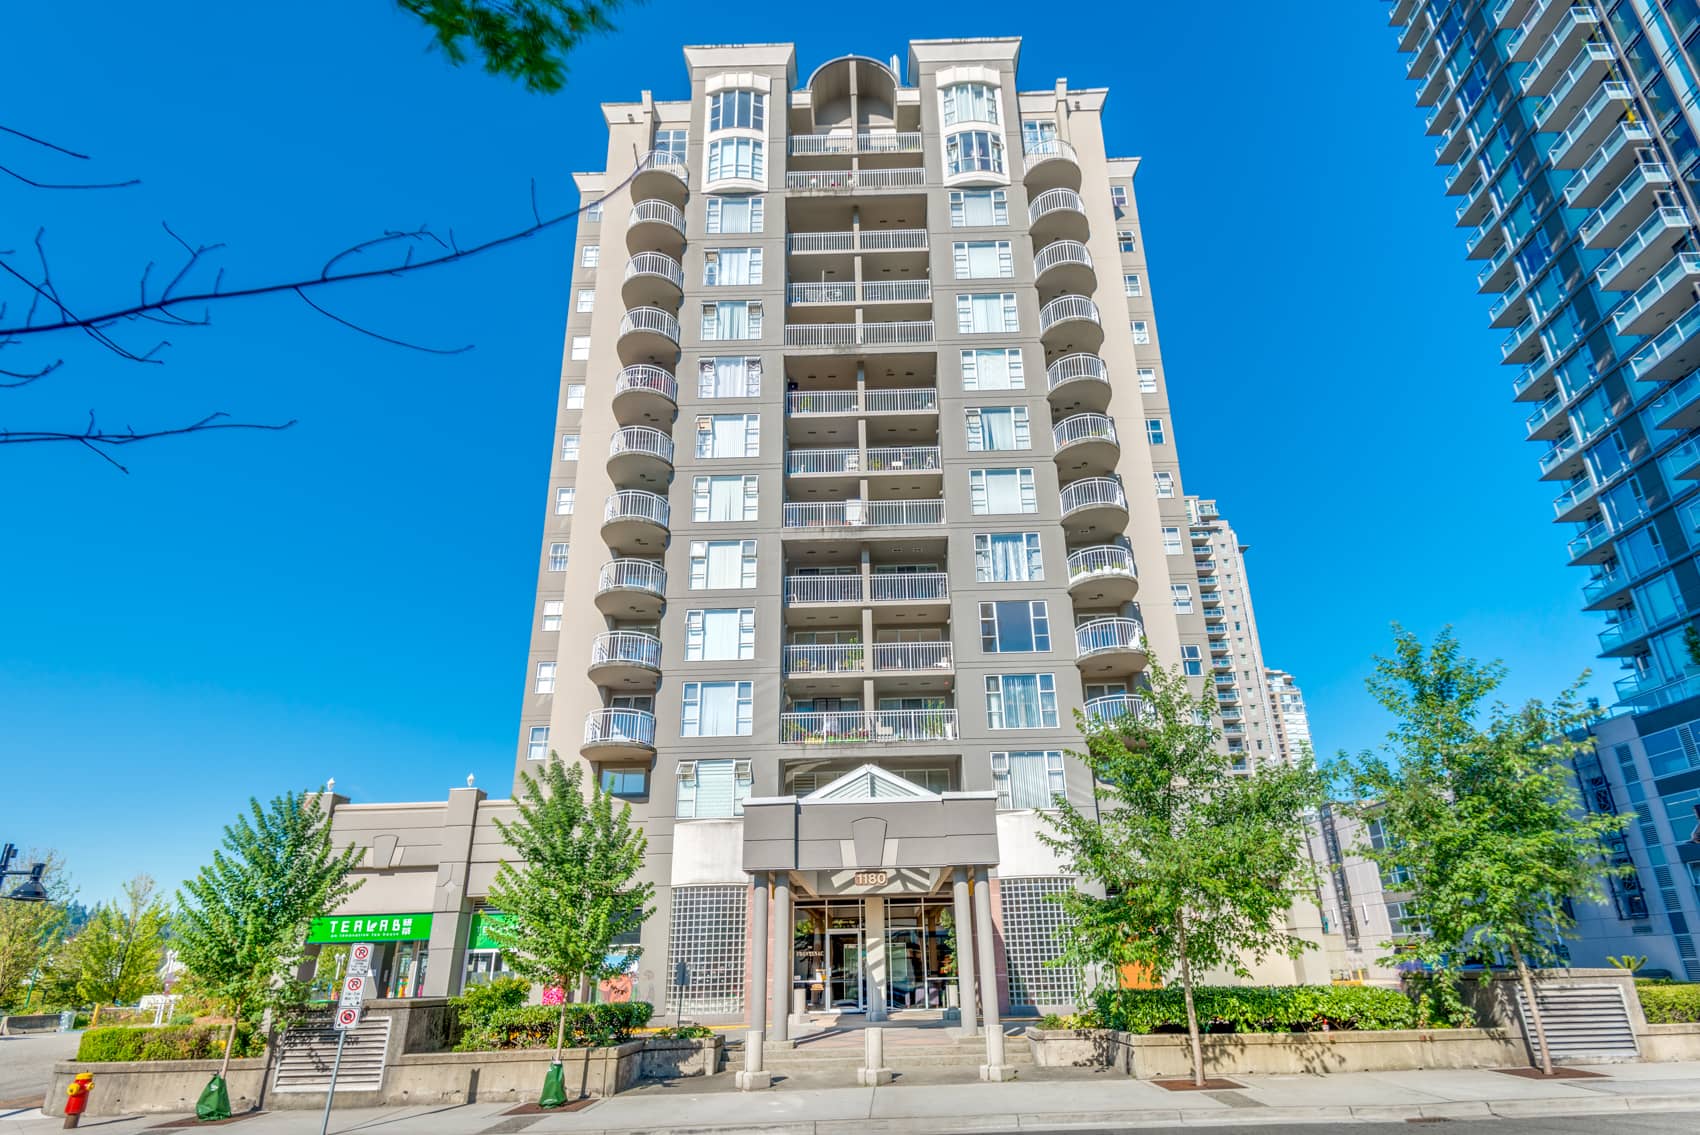 Perfectly Renovated 2 Bedroom Condo in Coquitlam